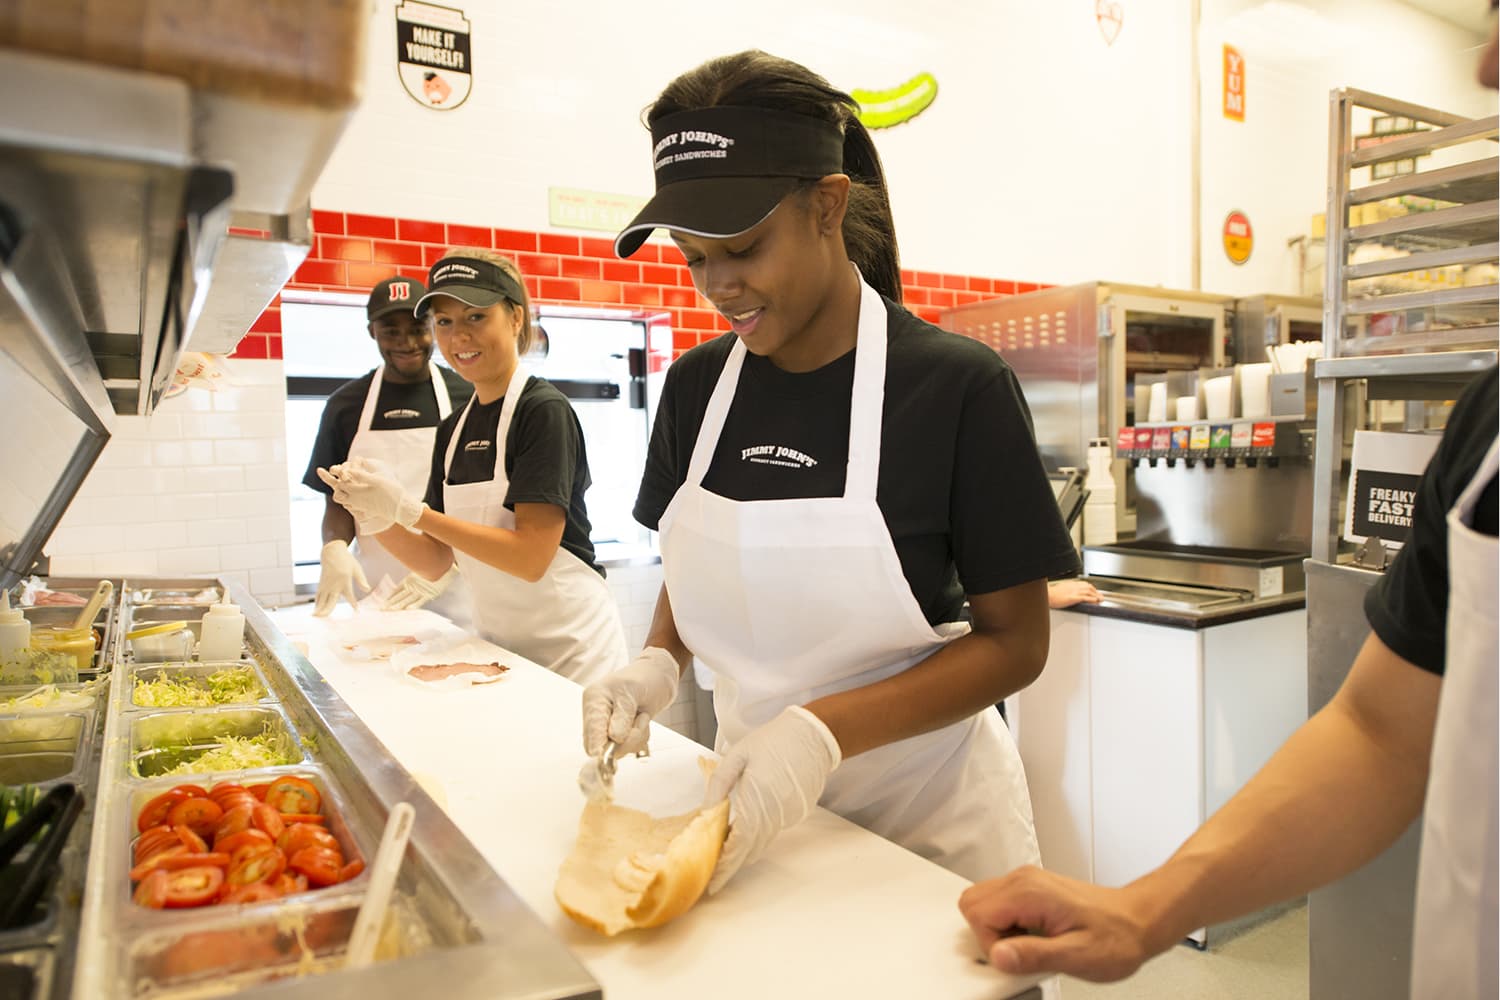 Low-wage workers, from fast-food to construction, are being asked to sign binding noncompete agreements. (Jimmy John's Franchise, LLC via Wikimedia Commons)